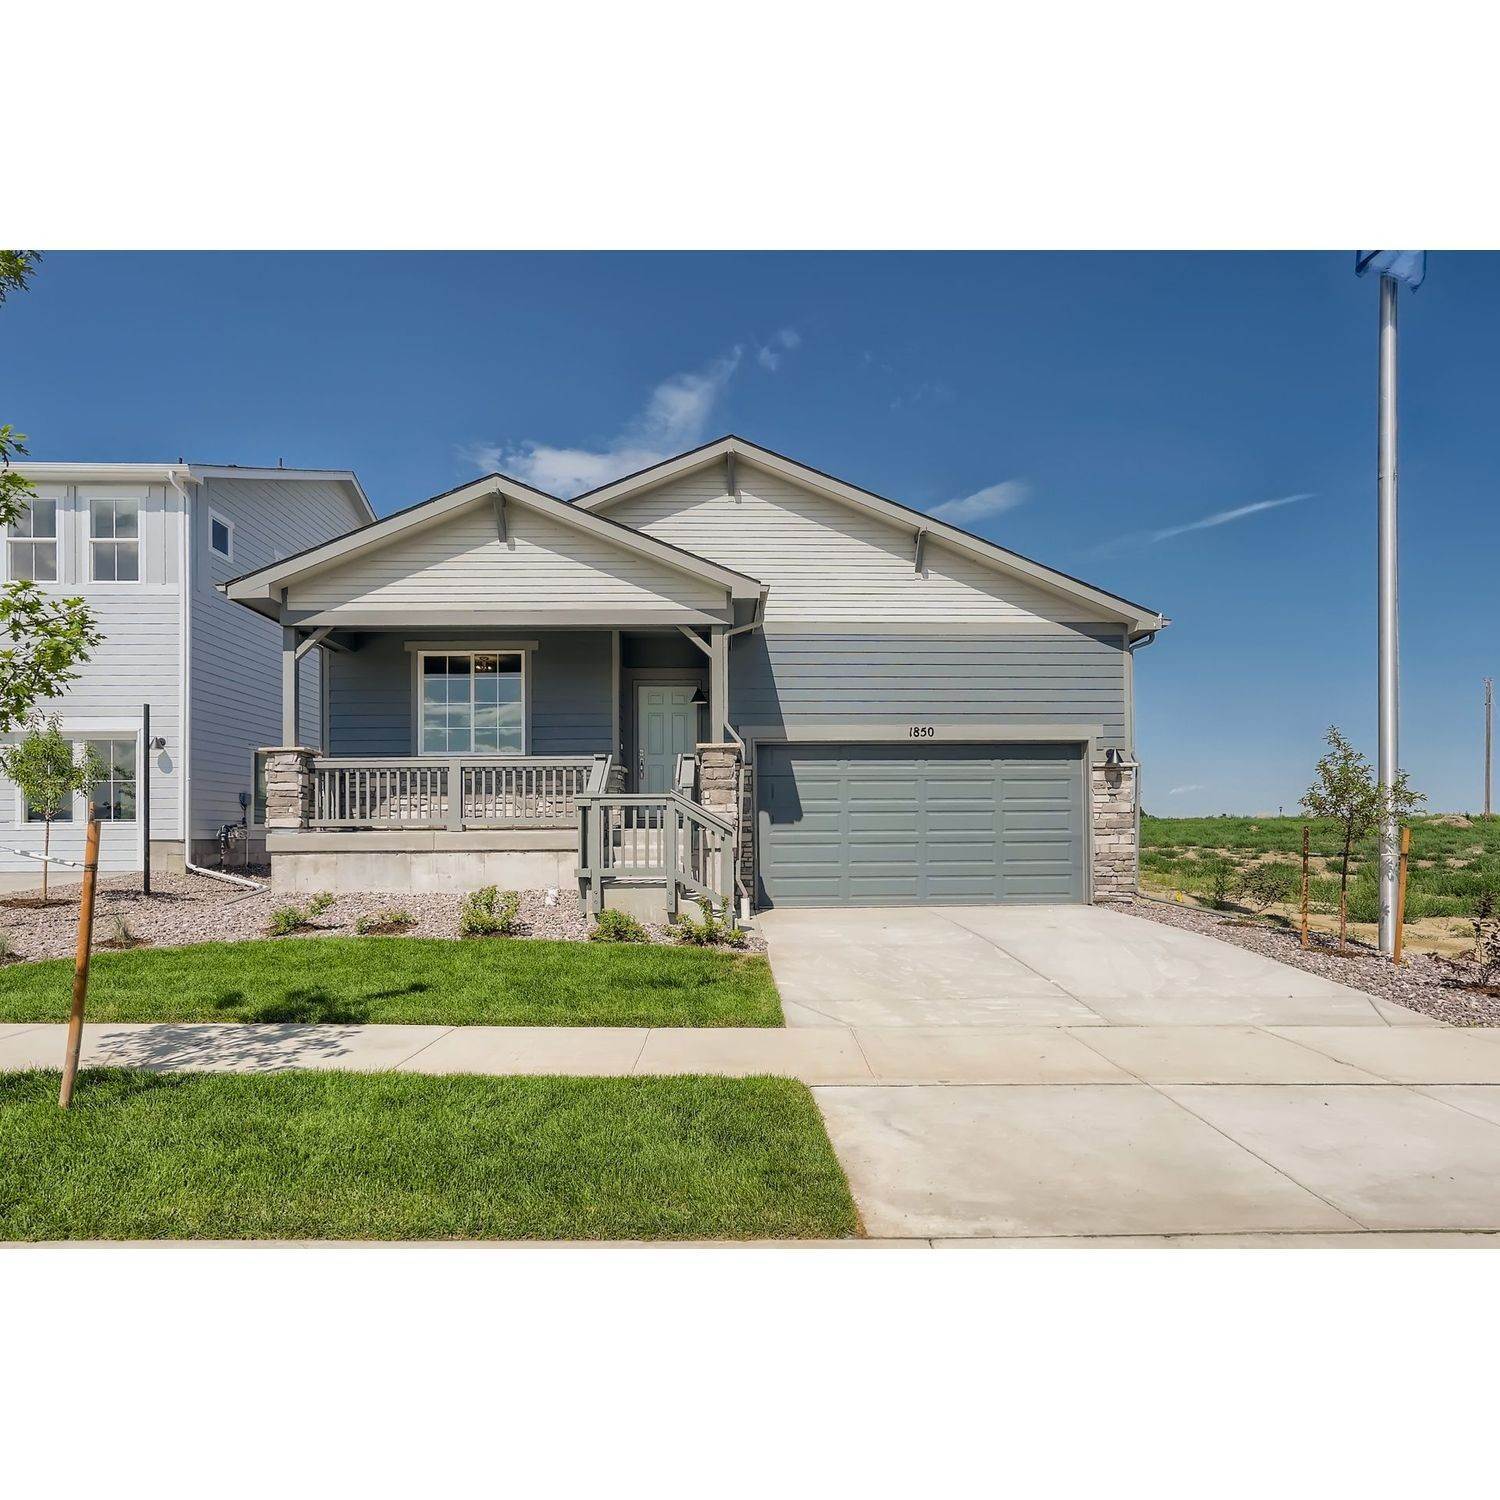 5. Reserve at Timberline building at 1844 Foggy Brook Drive, Fort Collins, CO 80528